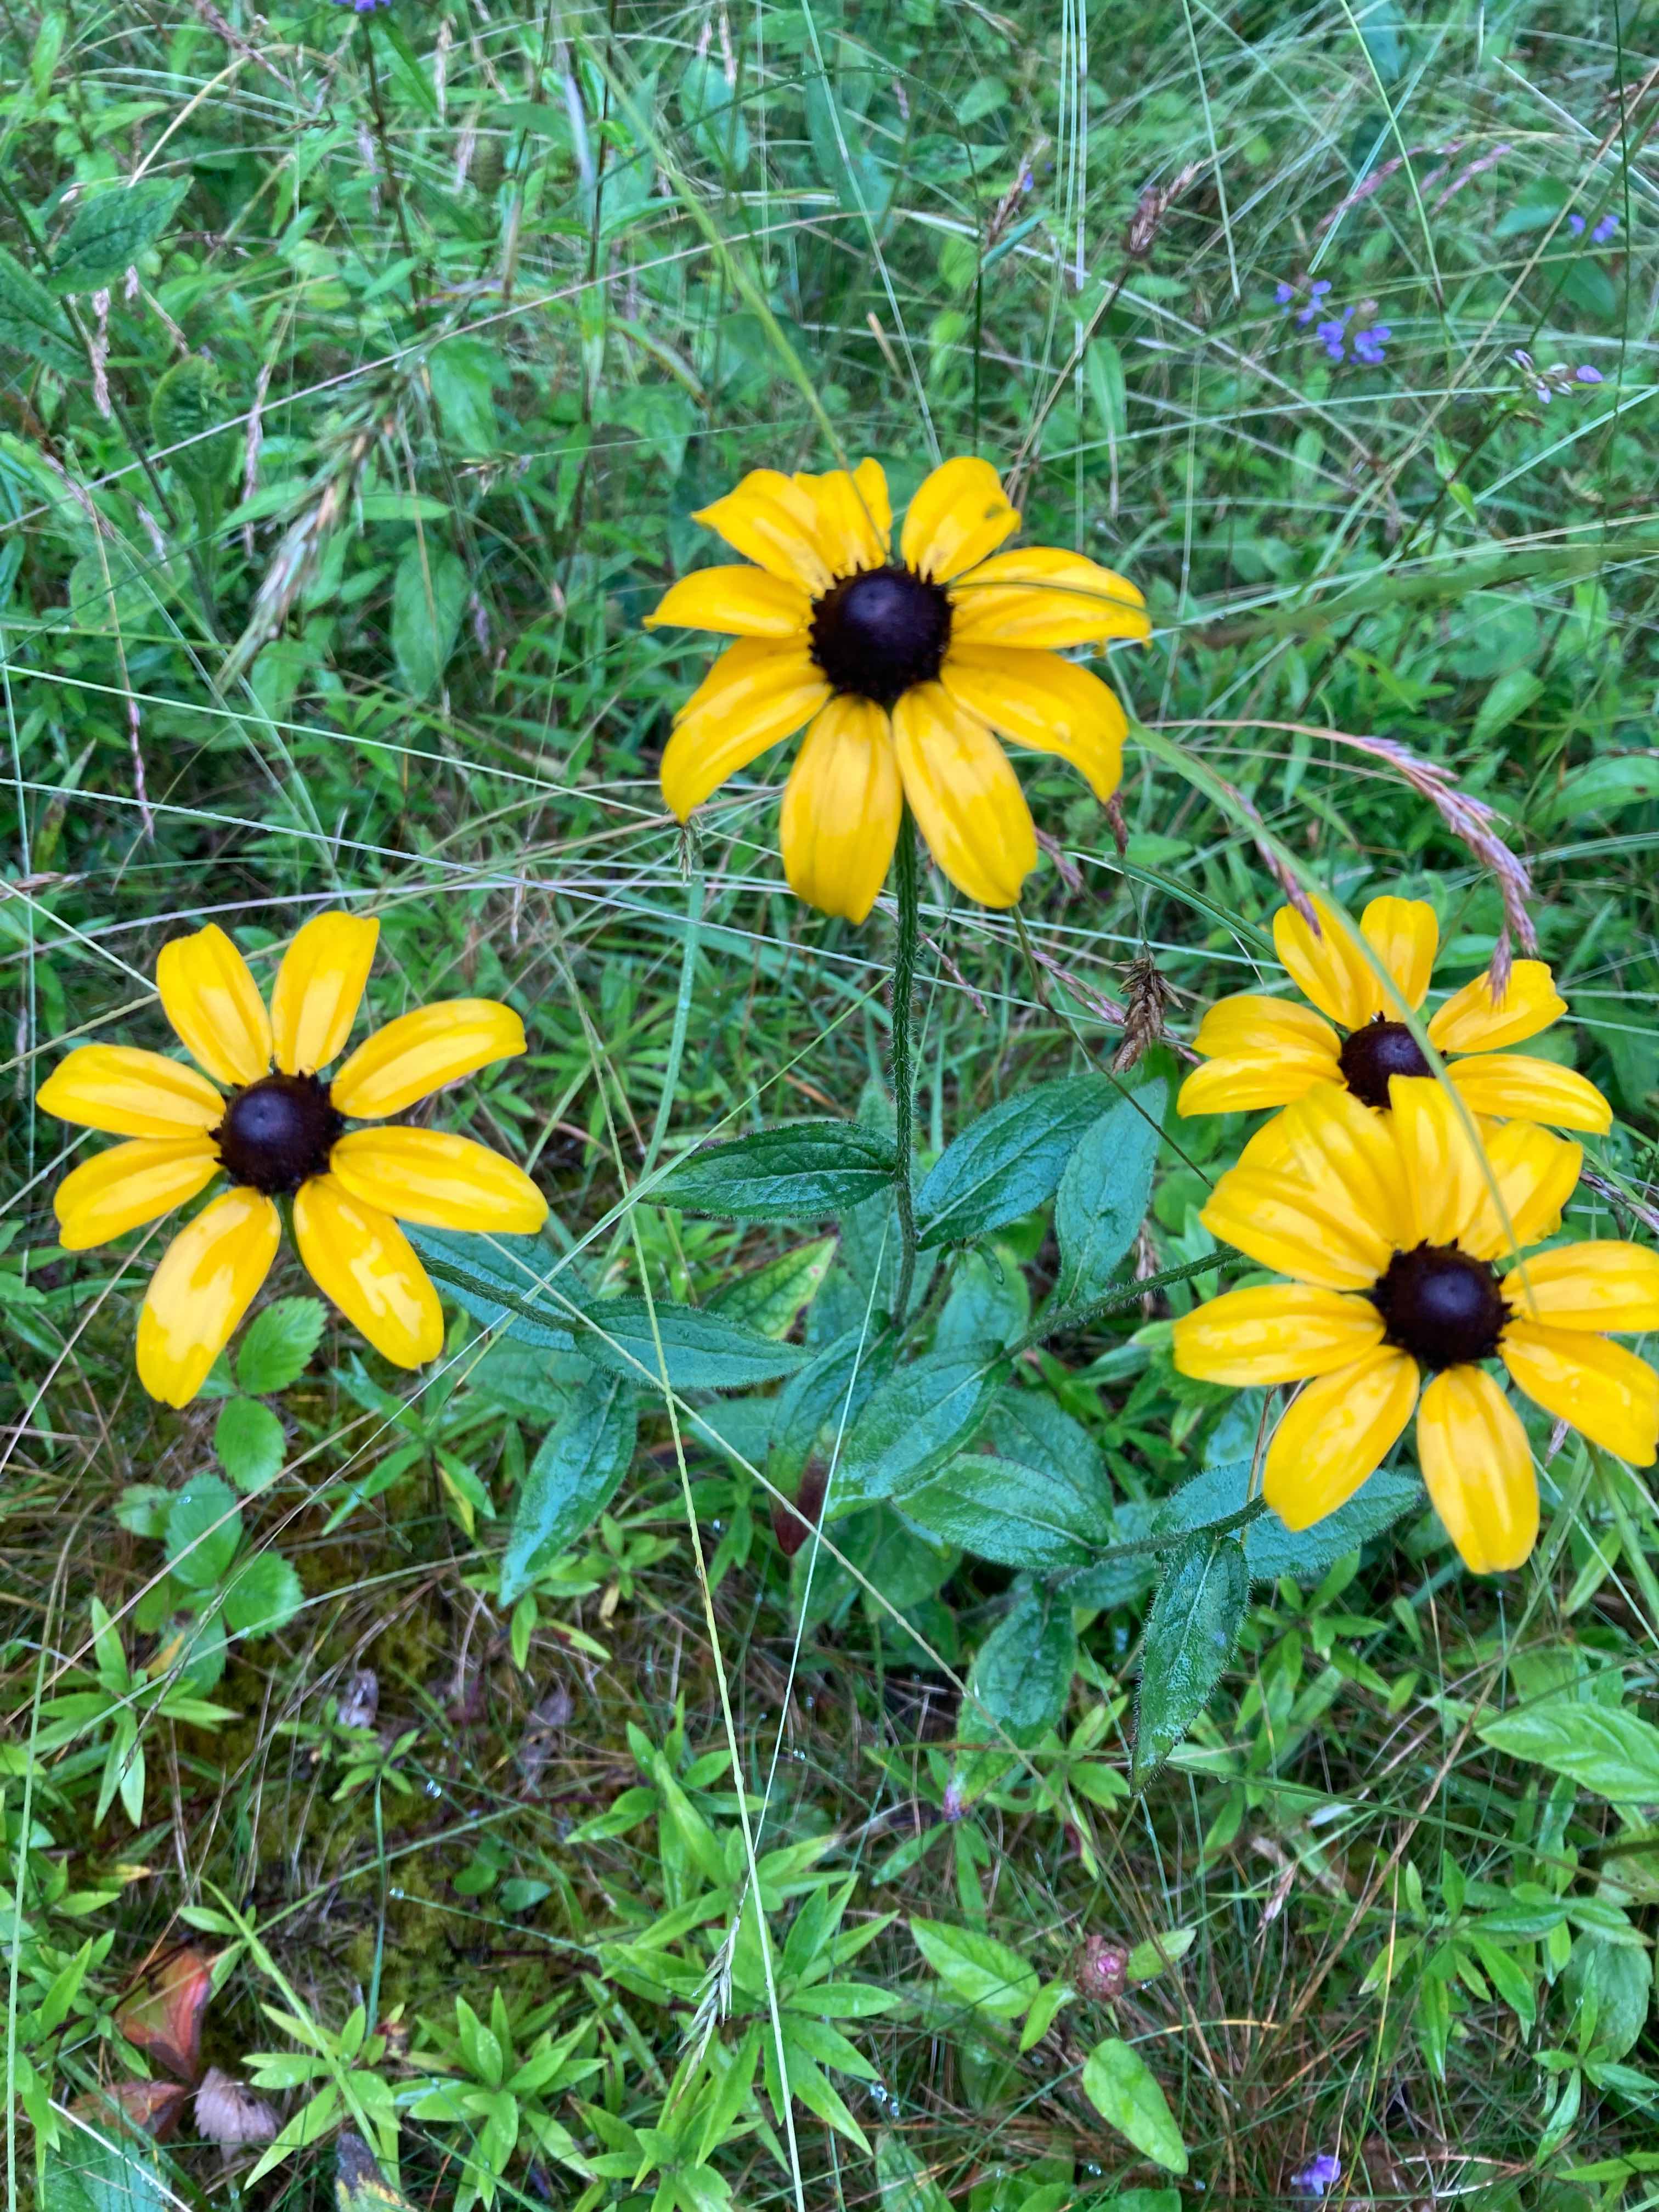 The Scientific Name is Rudbeckia hirta. You will likely hear them called Black-eyed Susan, Black-eyed Coneflower. This picture shows the  of Rudbeckia hirta